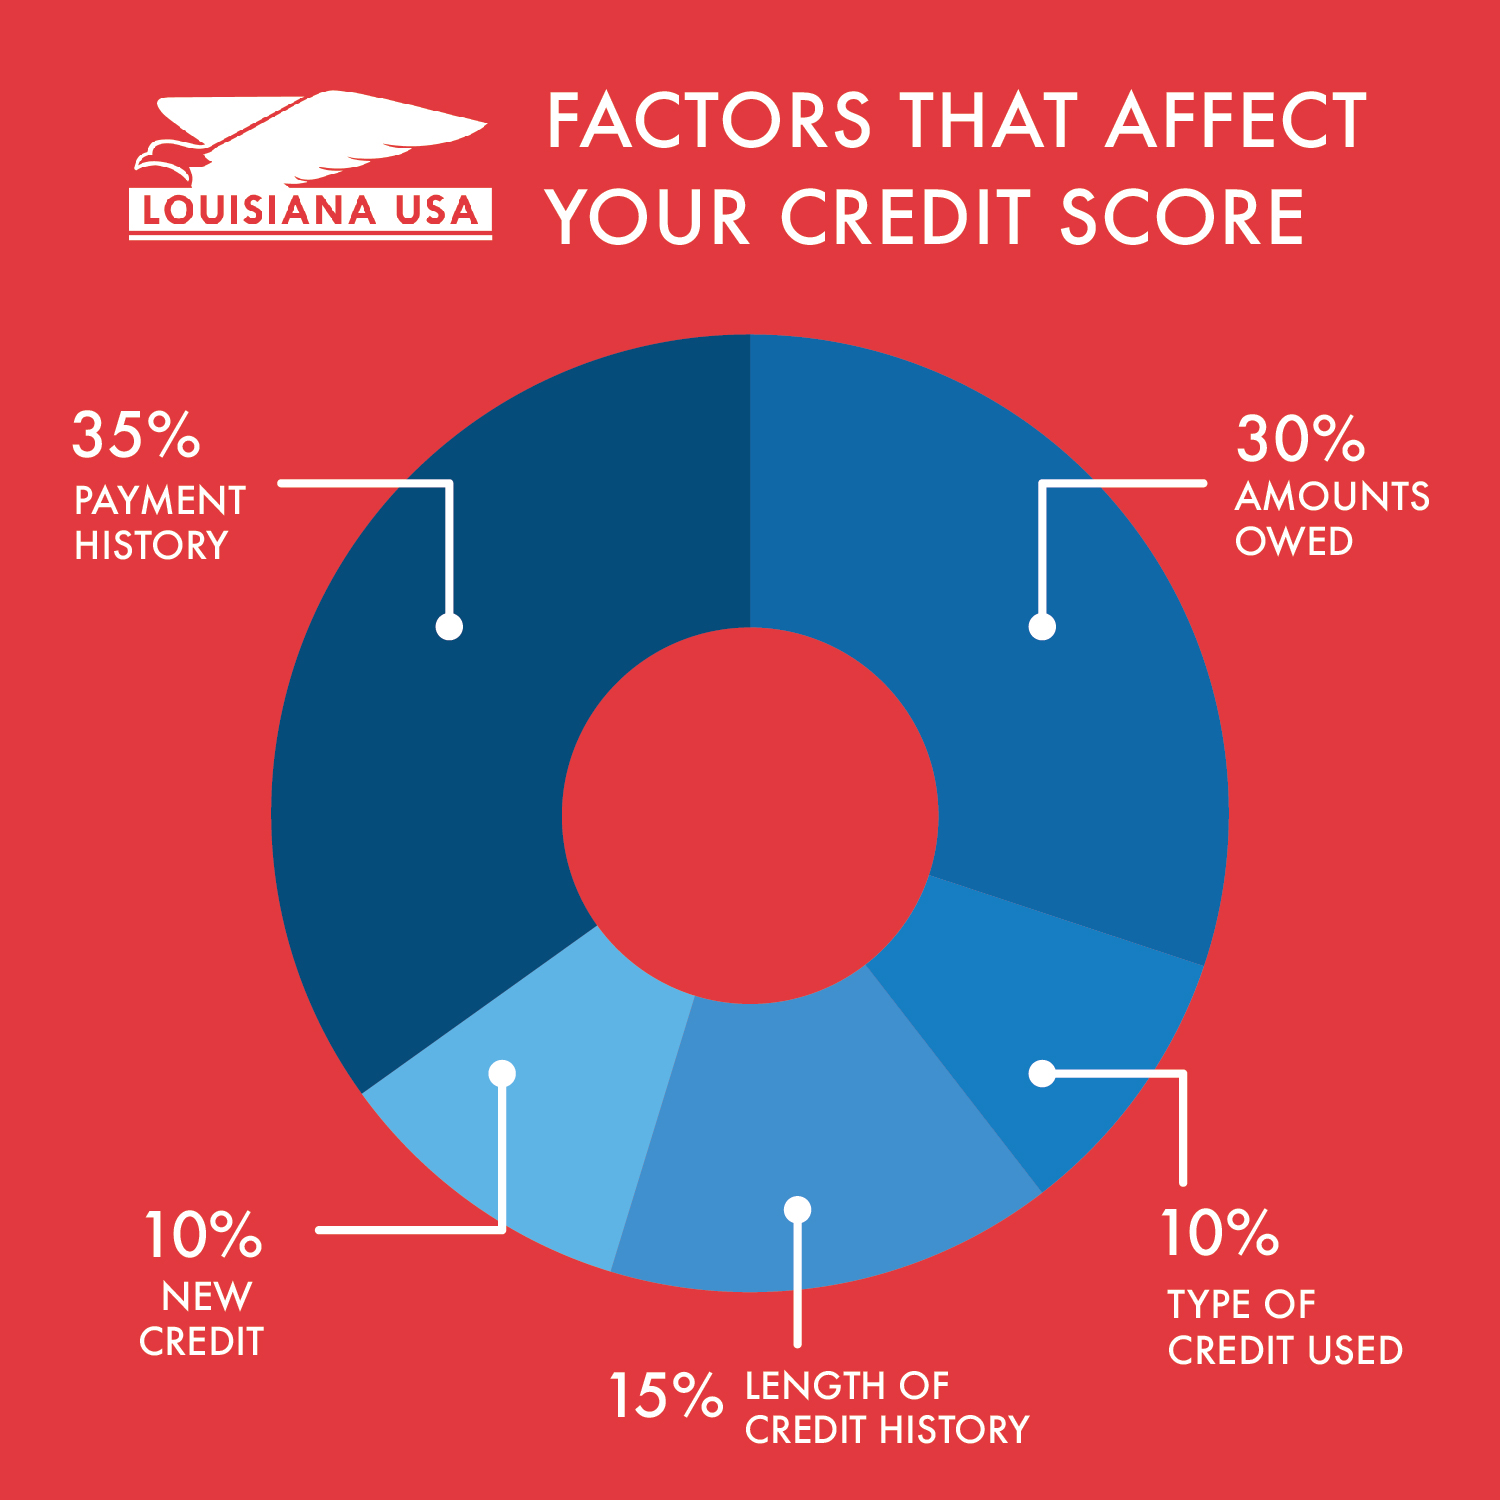 Credit Builder Loans: Here To Improve Your Score